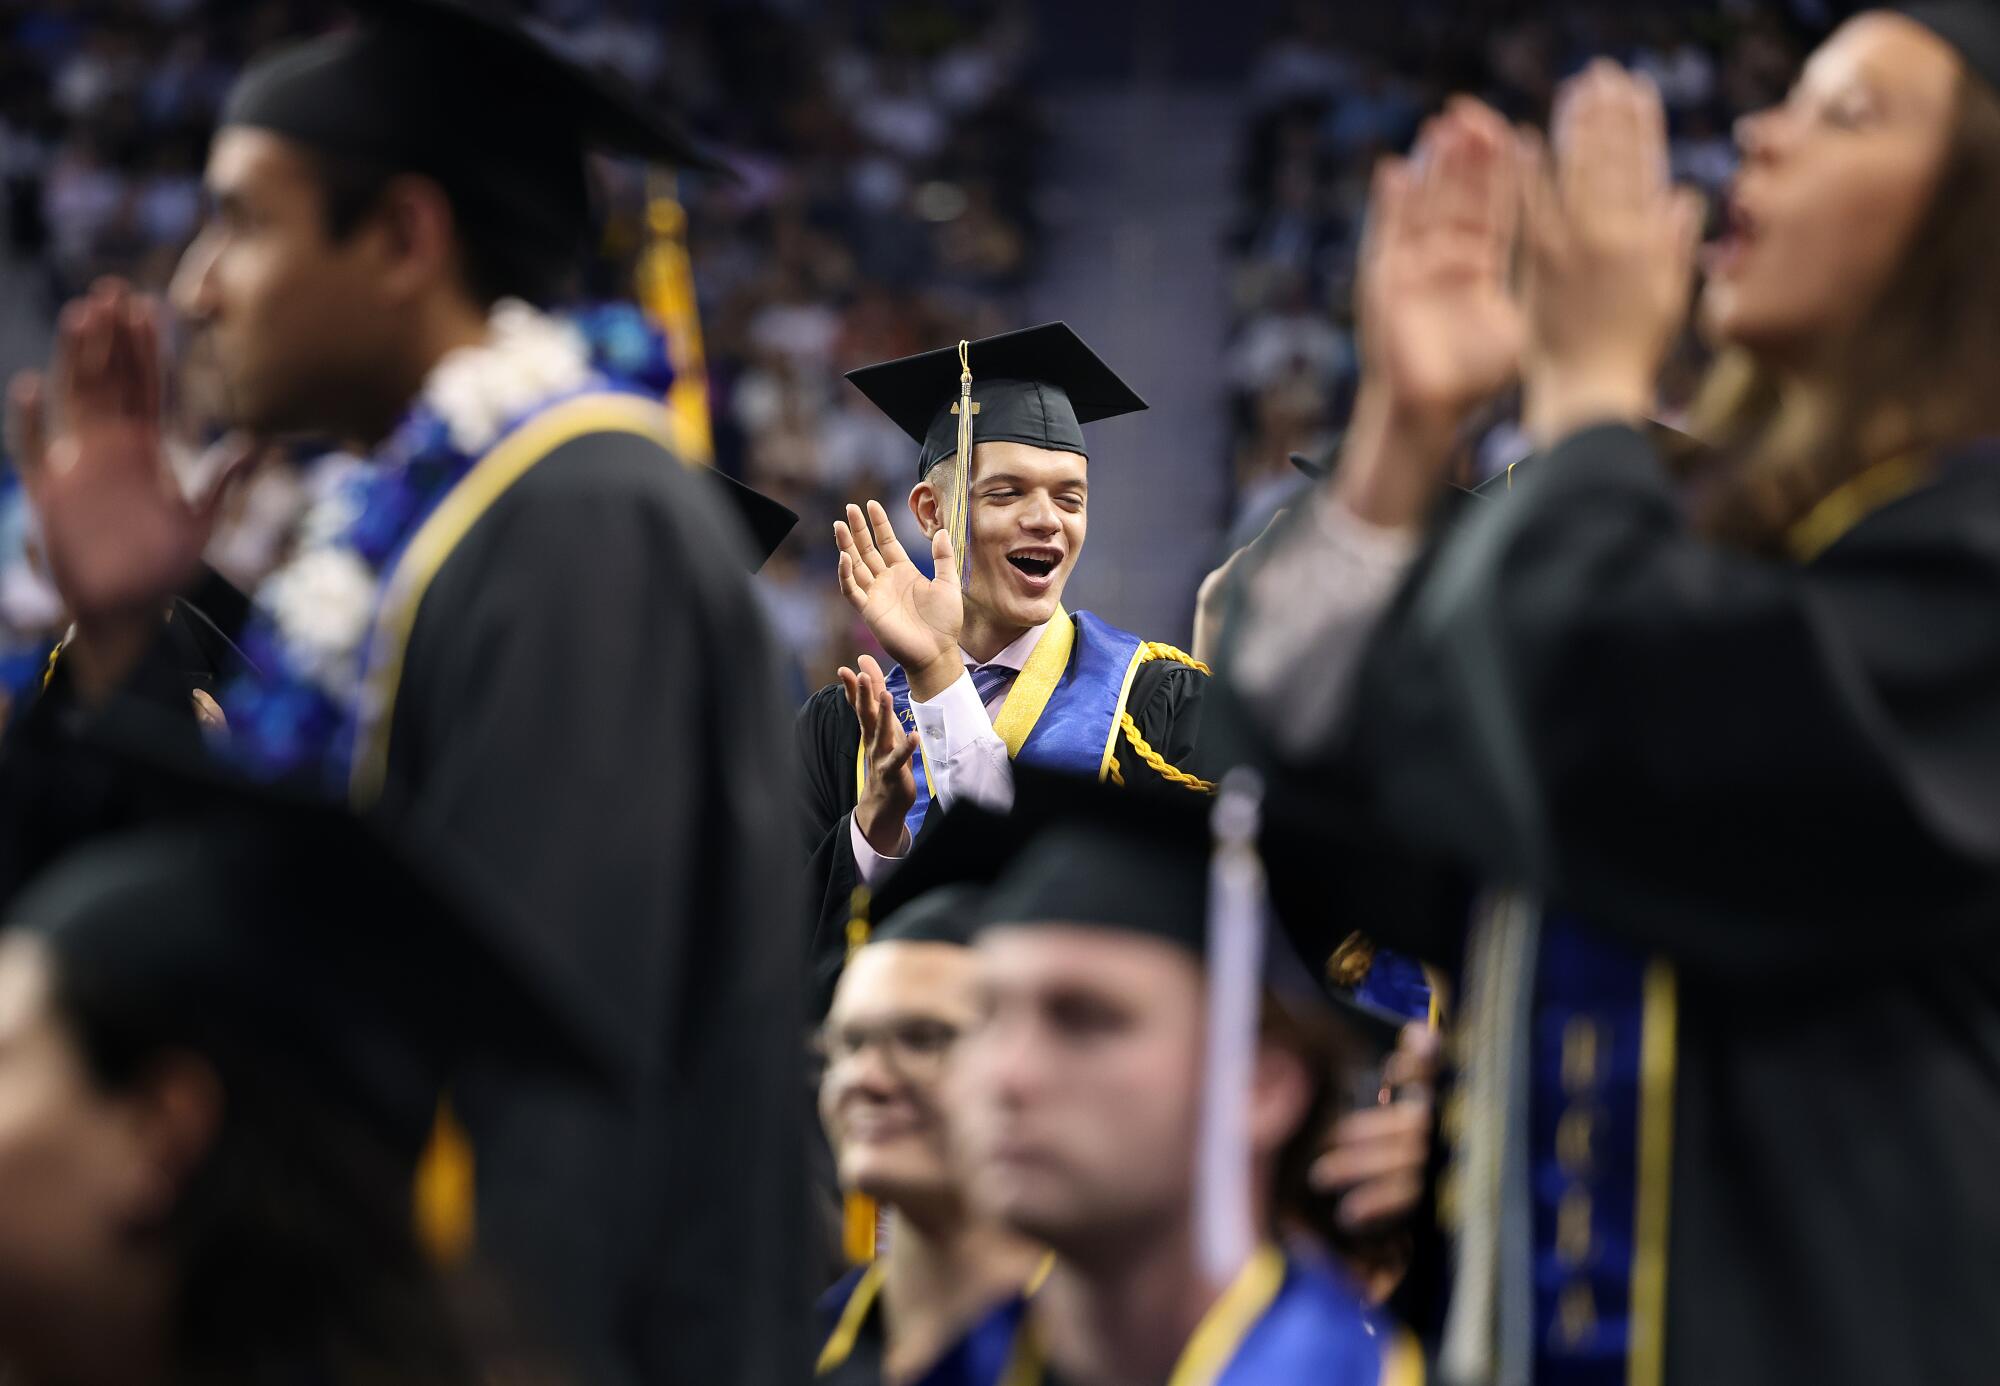 Graduates celebrate at their commencement ceremony for the College of Arts and Sciences at UCLA's Pauley Pavilion.